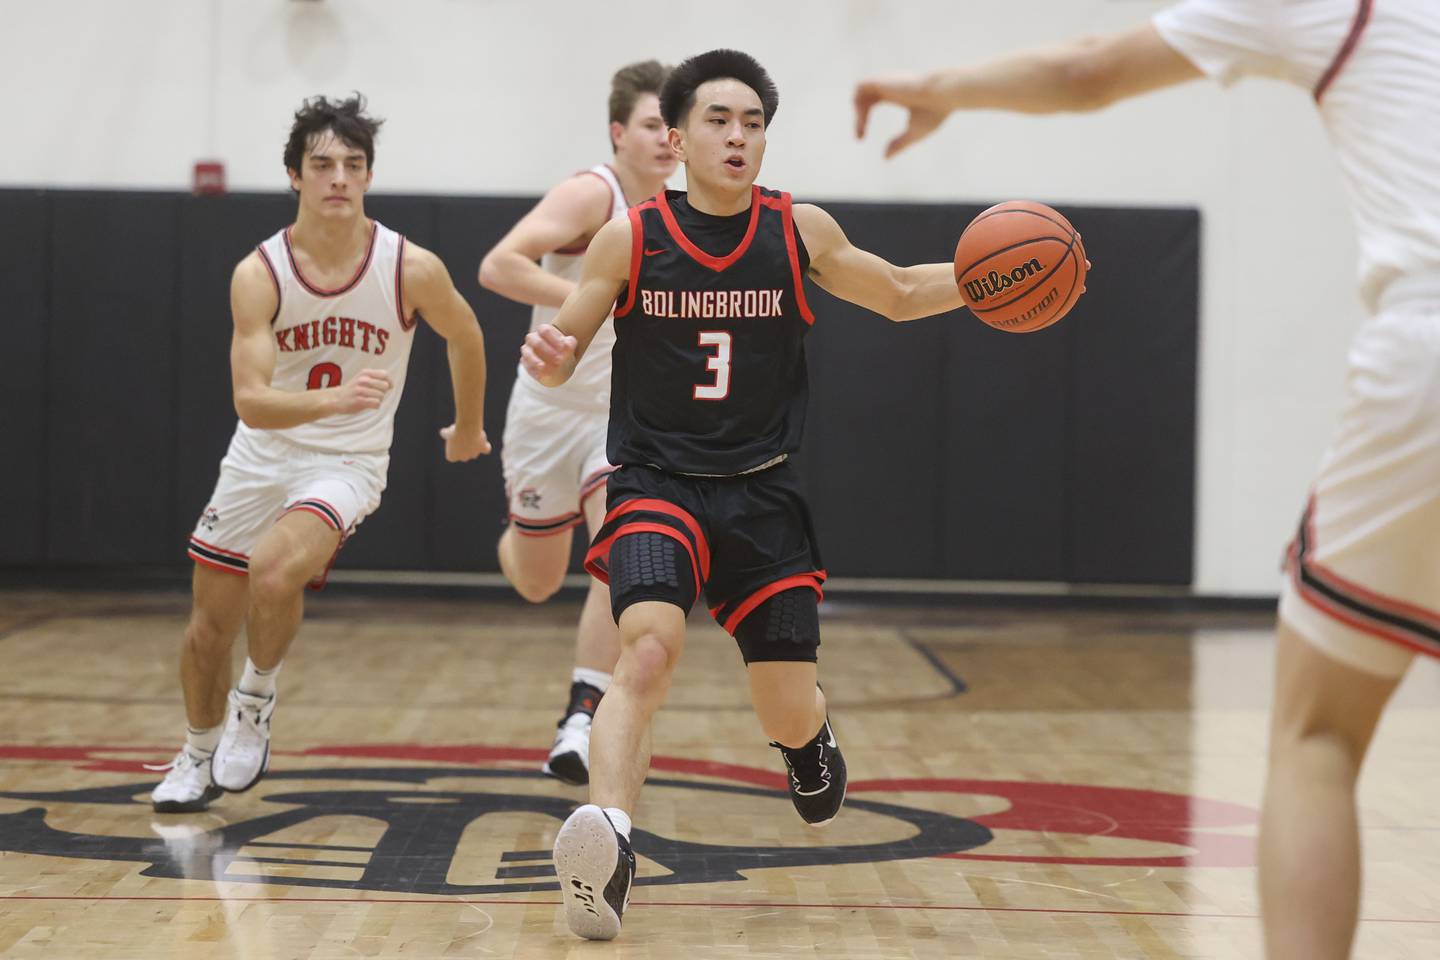 Bolingbrook’s Josh Aniceto work the ball upcourt against Lincoln-Way Central.